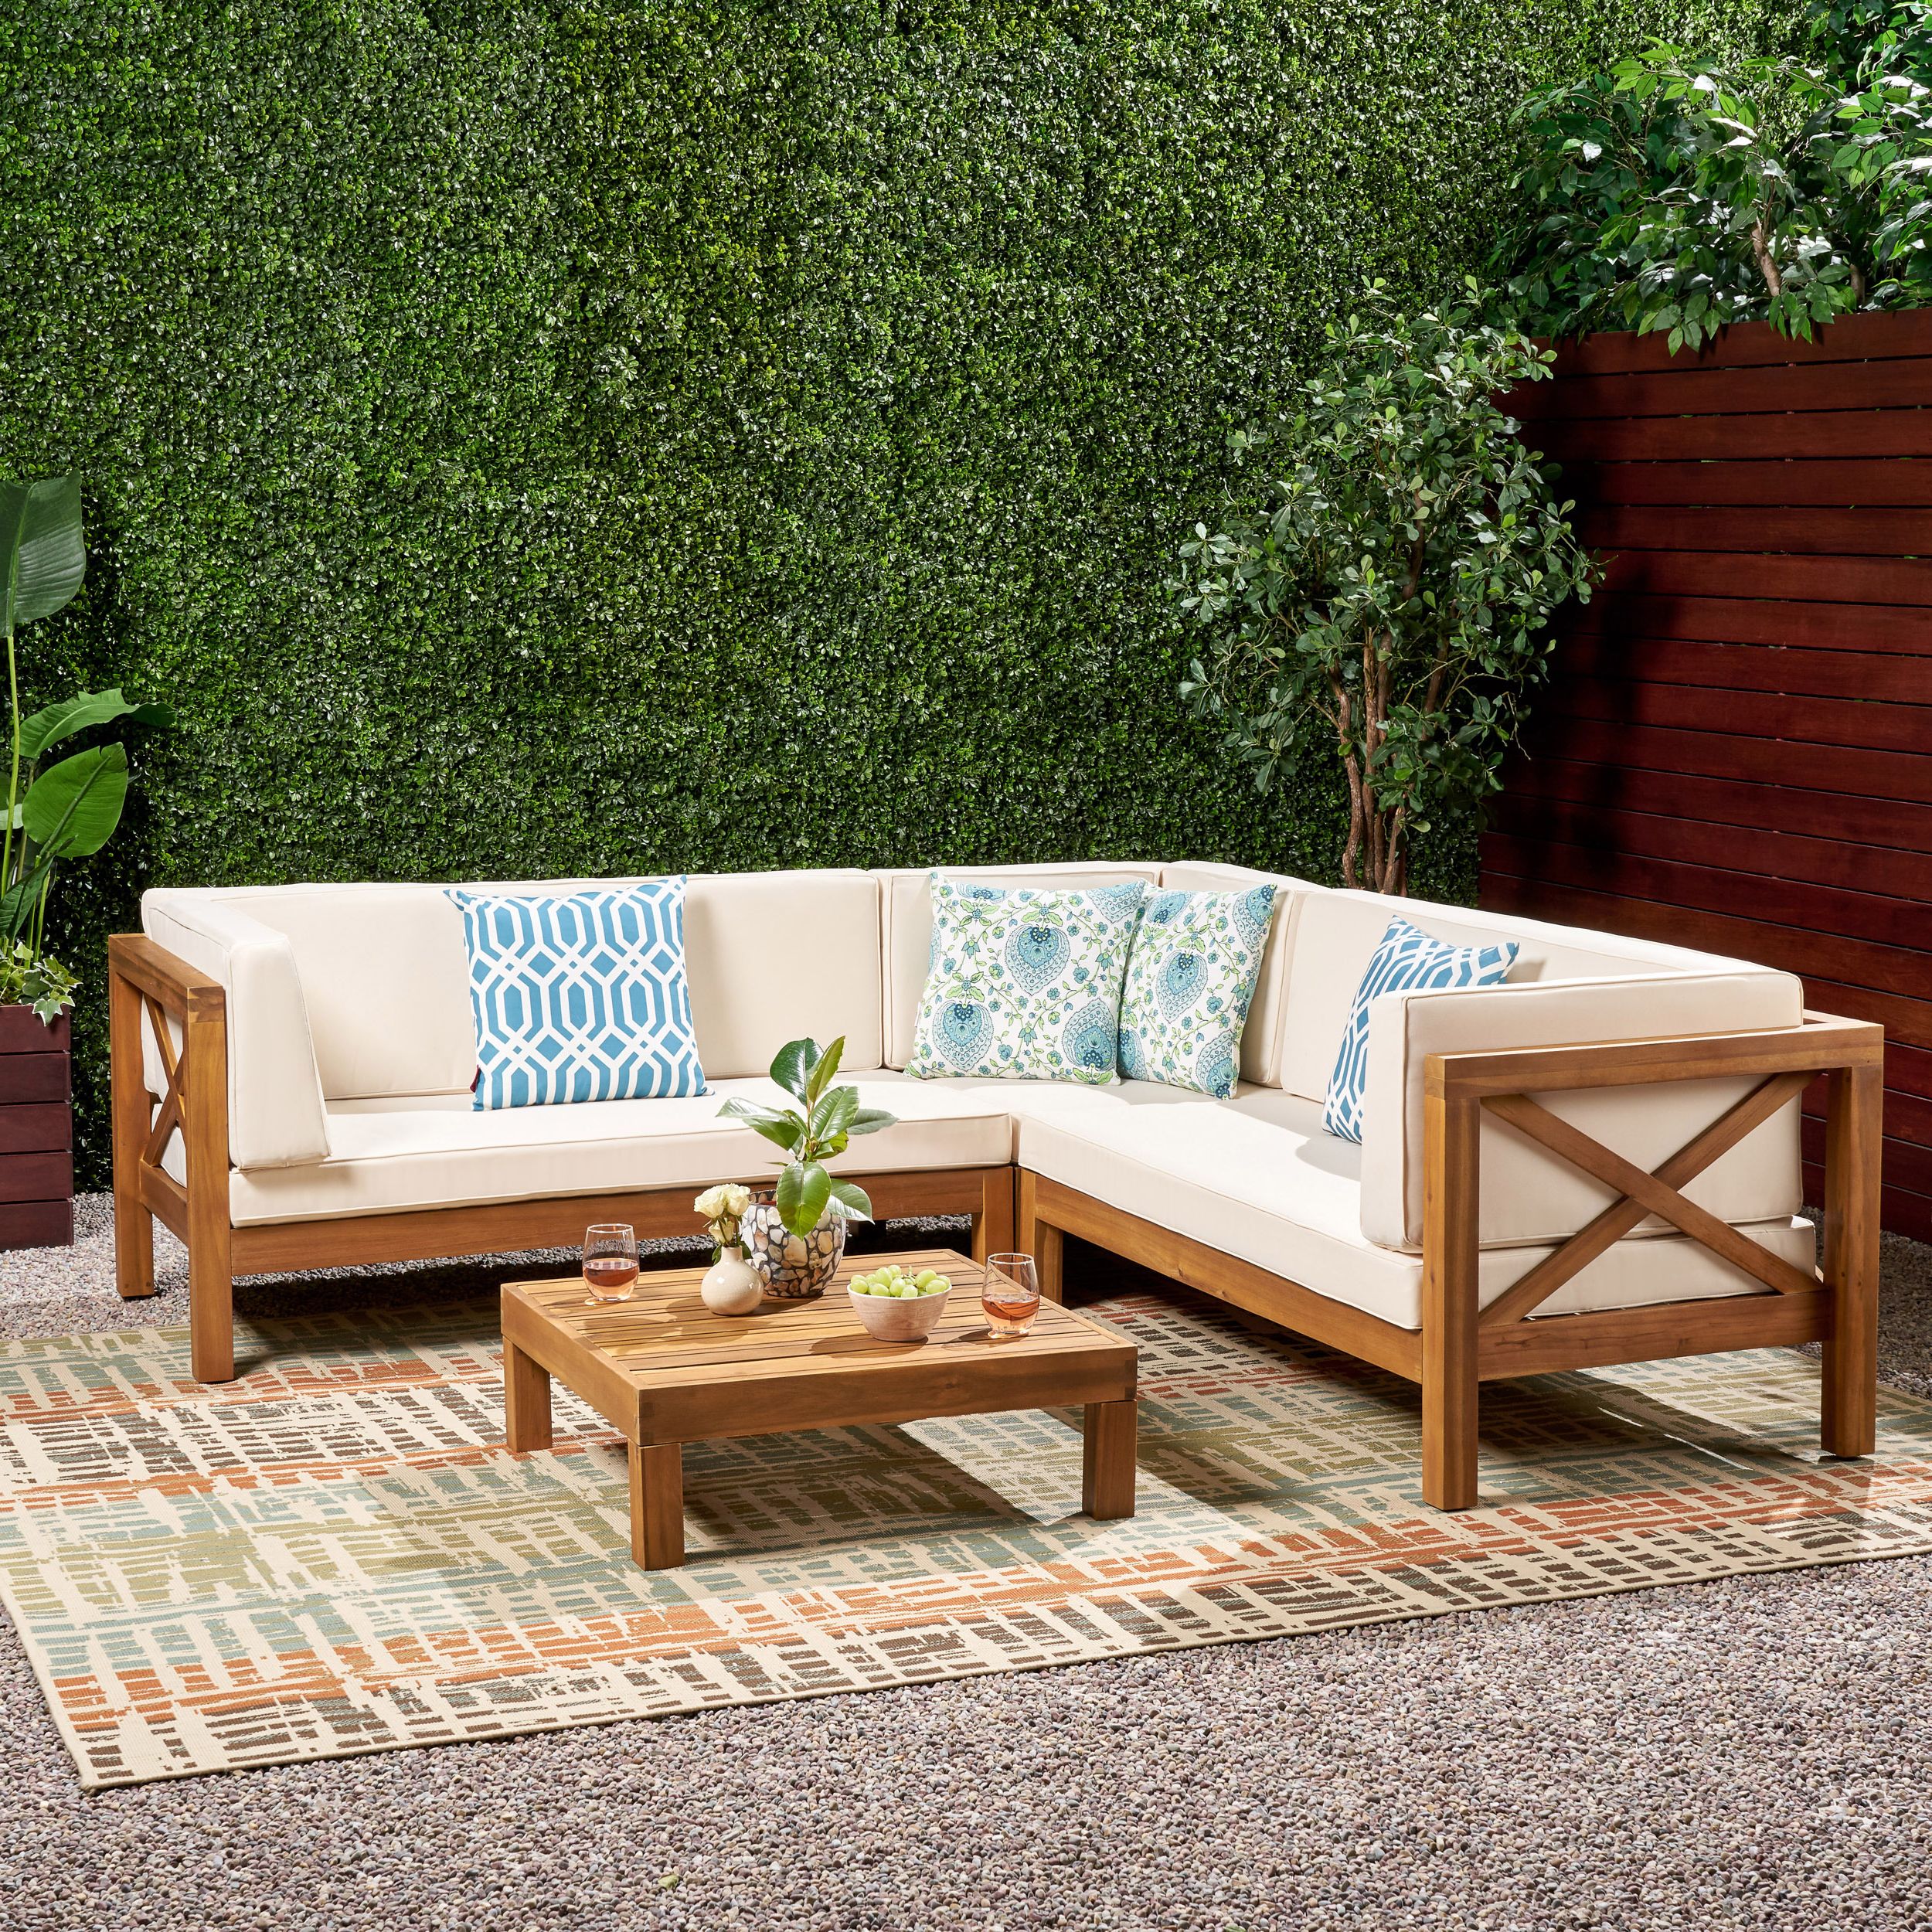 4 Piece Outdoor Seating Patio Sets Within Well Liked Calle 4 Piece Outdoor X Back Wooden Sectional Set, Multiple Colors (View 4 of 15)